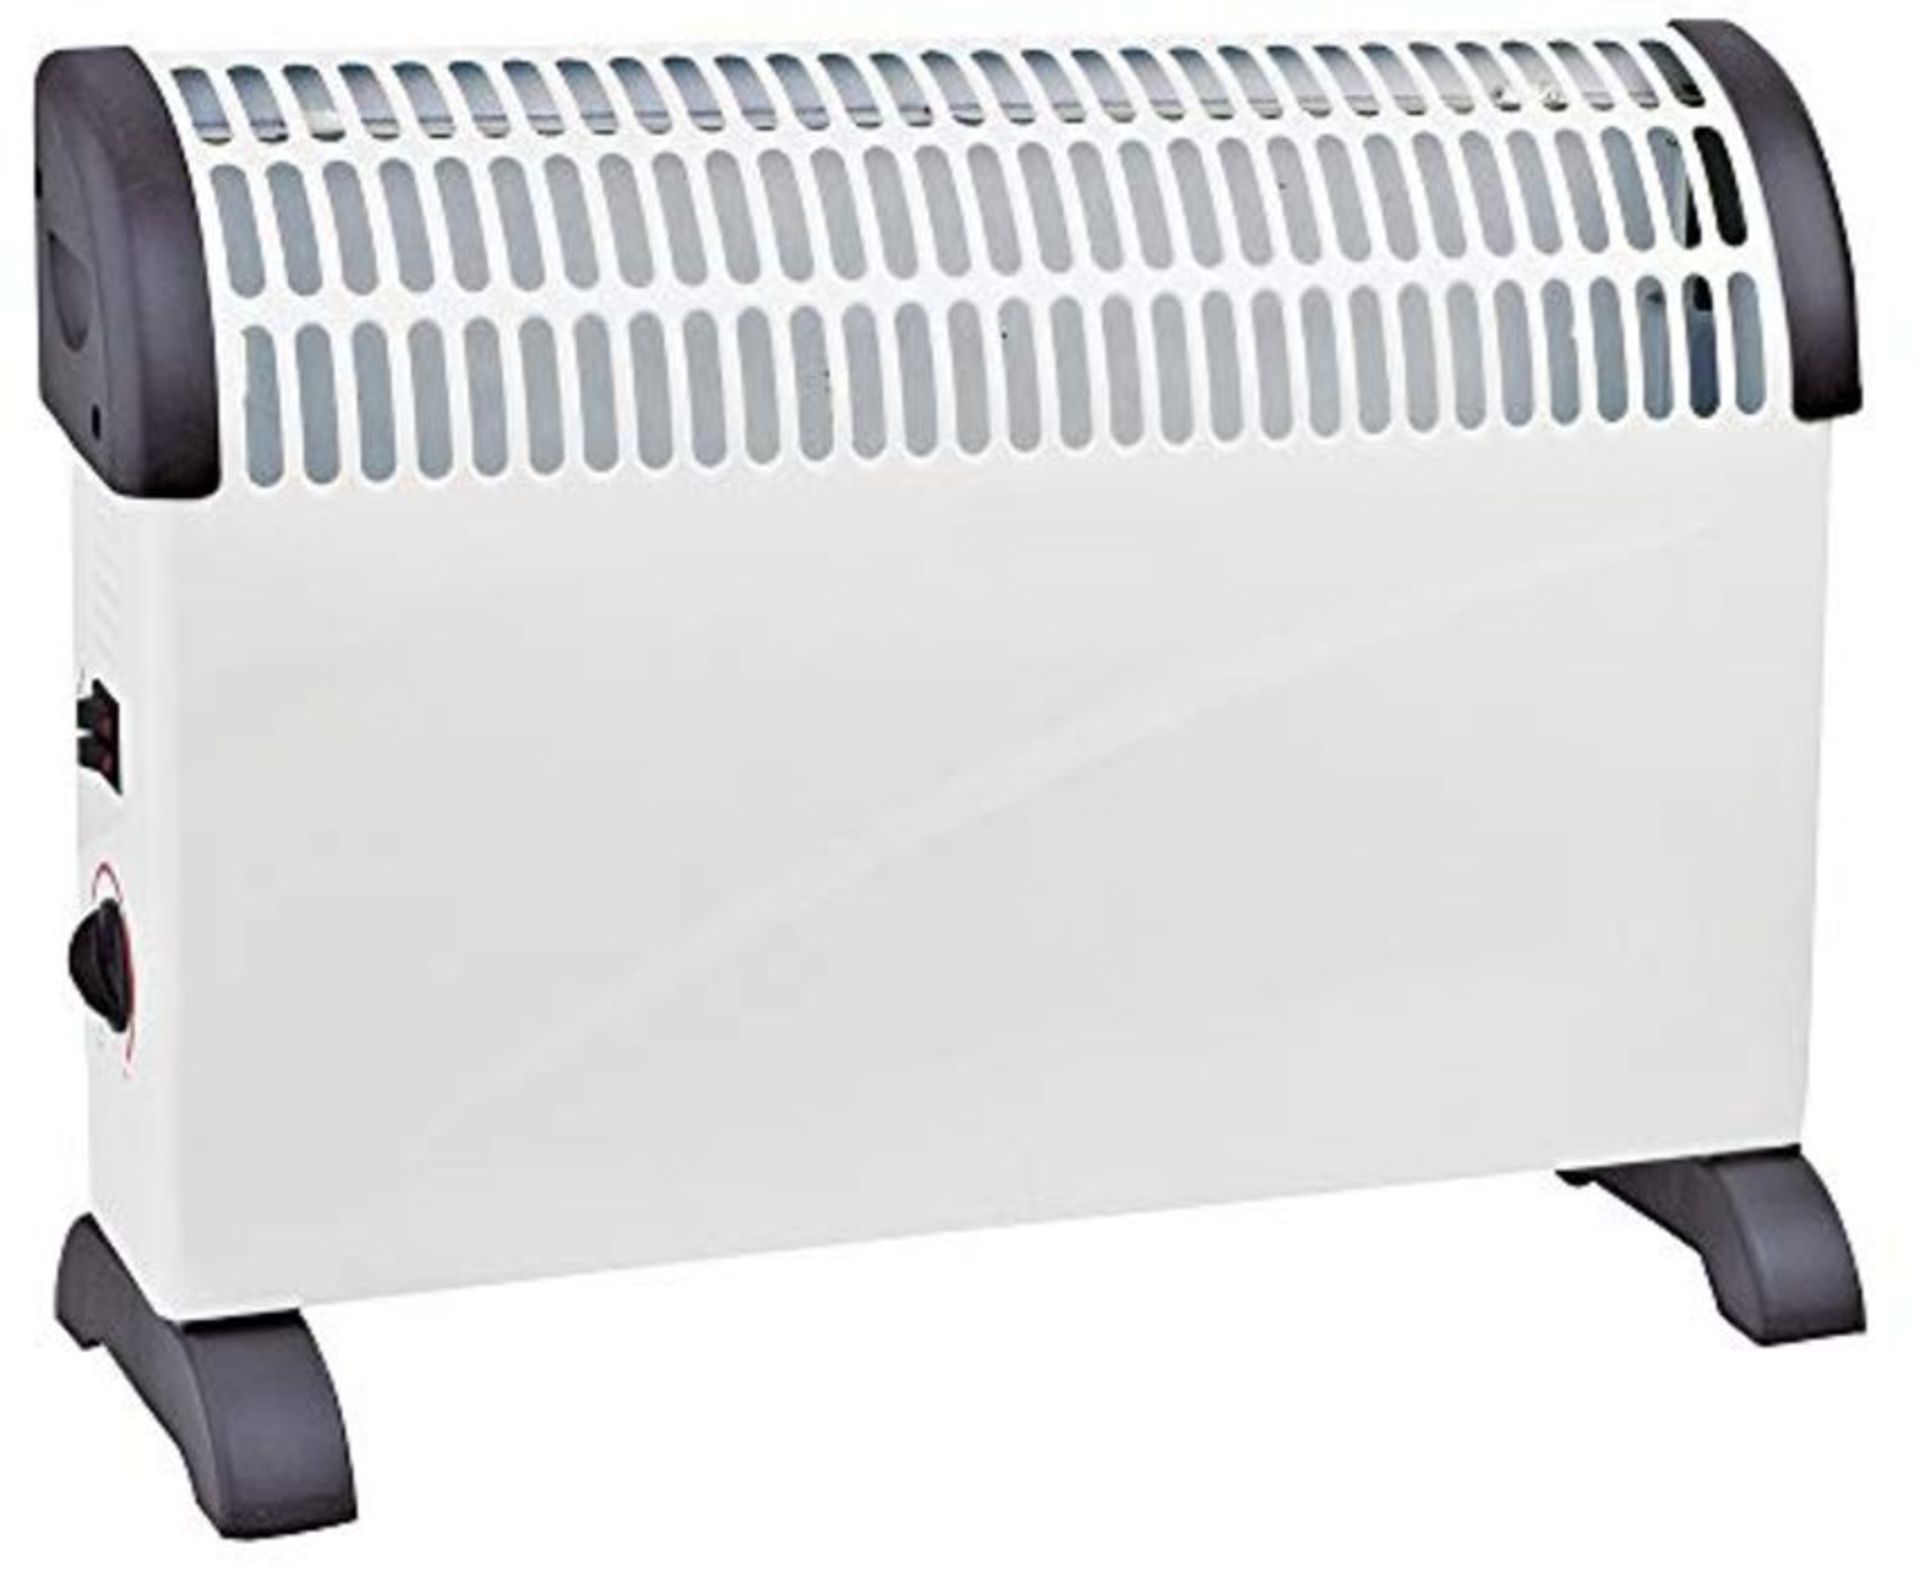 Pro Elec PEL00939 2kW Convector Heater with 3 Heat Settings, Free Standing